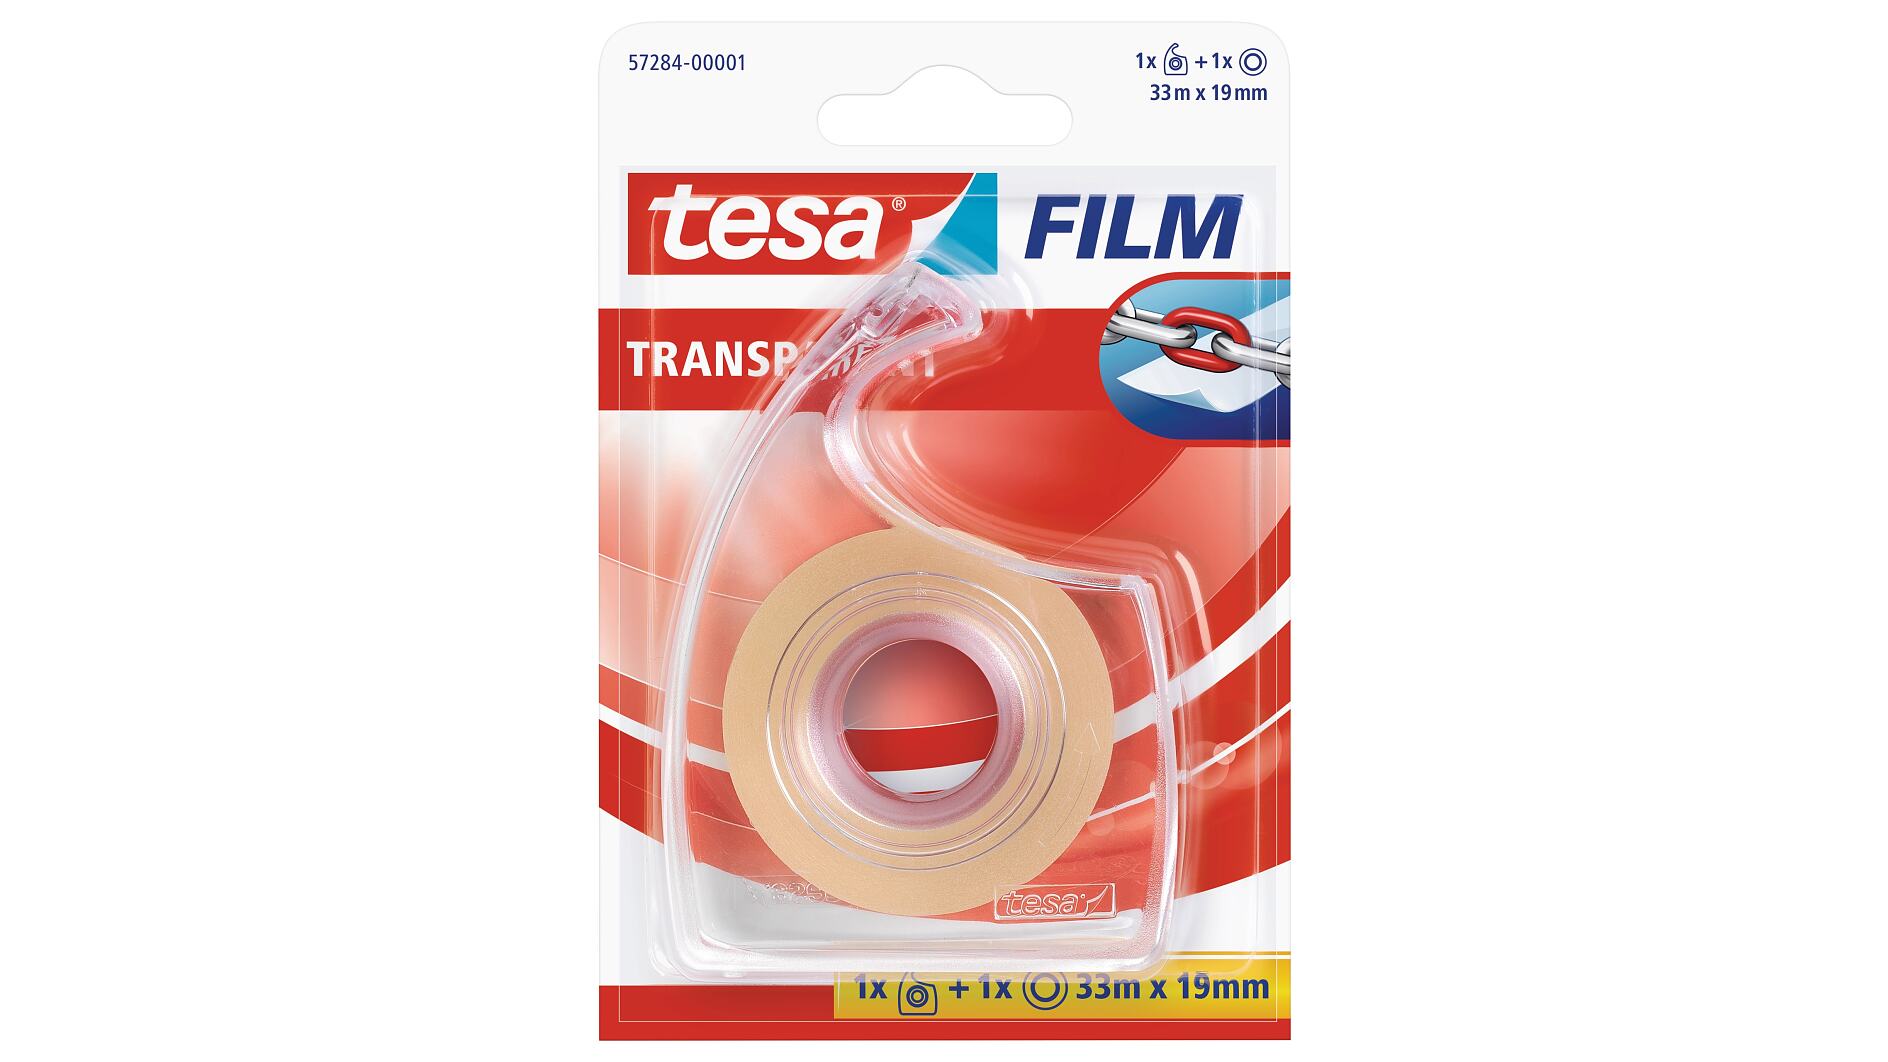 tesafilm Standard Clear Multi-Purpose Adhesive Tape for Home, Office and  School - 8 Rolls 66 mx 19 mm